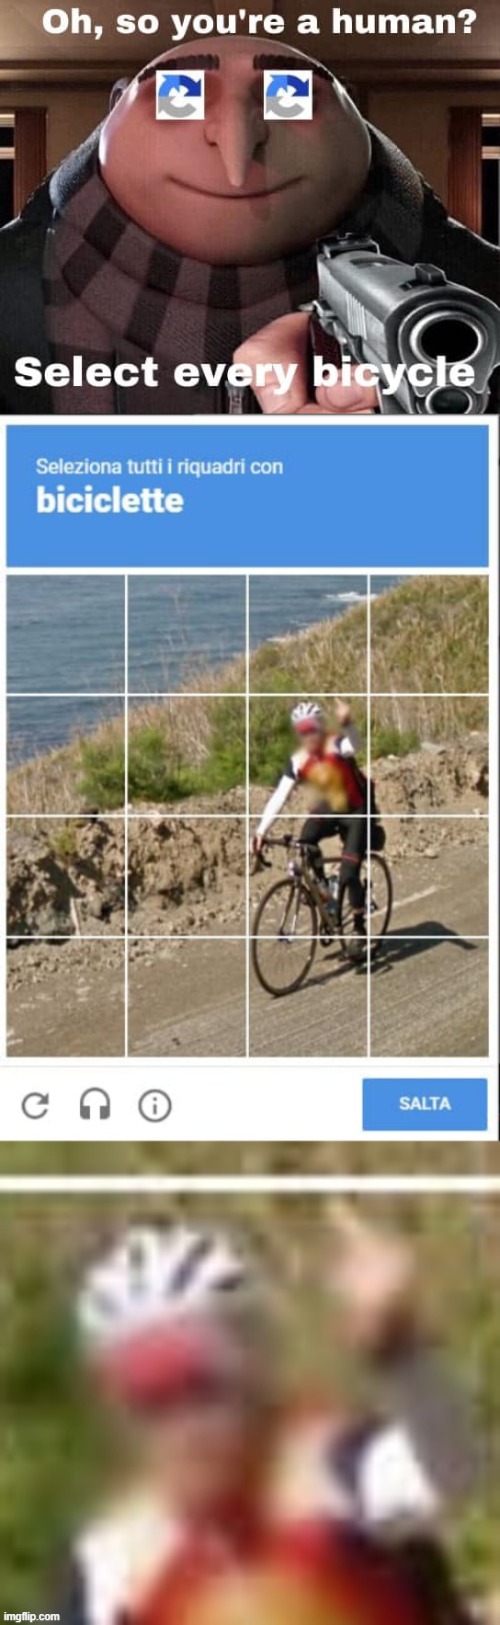 CAPTCHA checkpoint road rage | image tagged in captcha checkpoint,road rage,bicycle,wut,wot,what | made w/ Imgflip meme maker